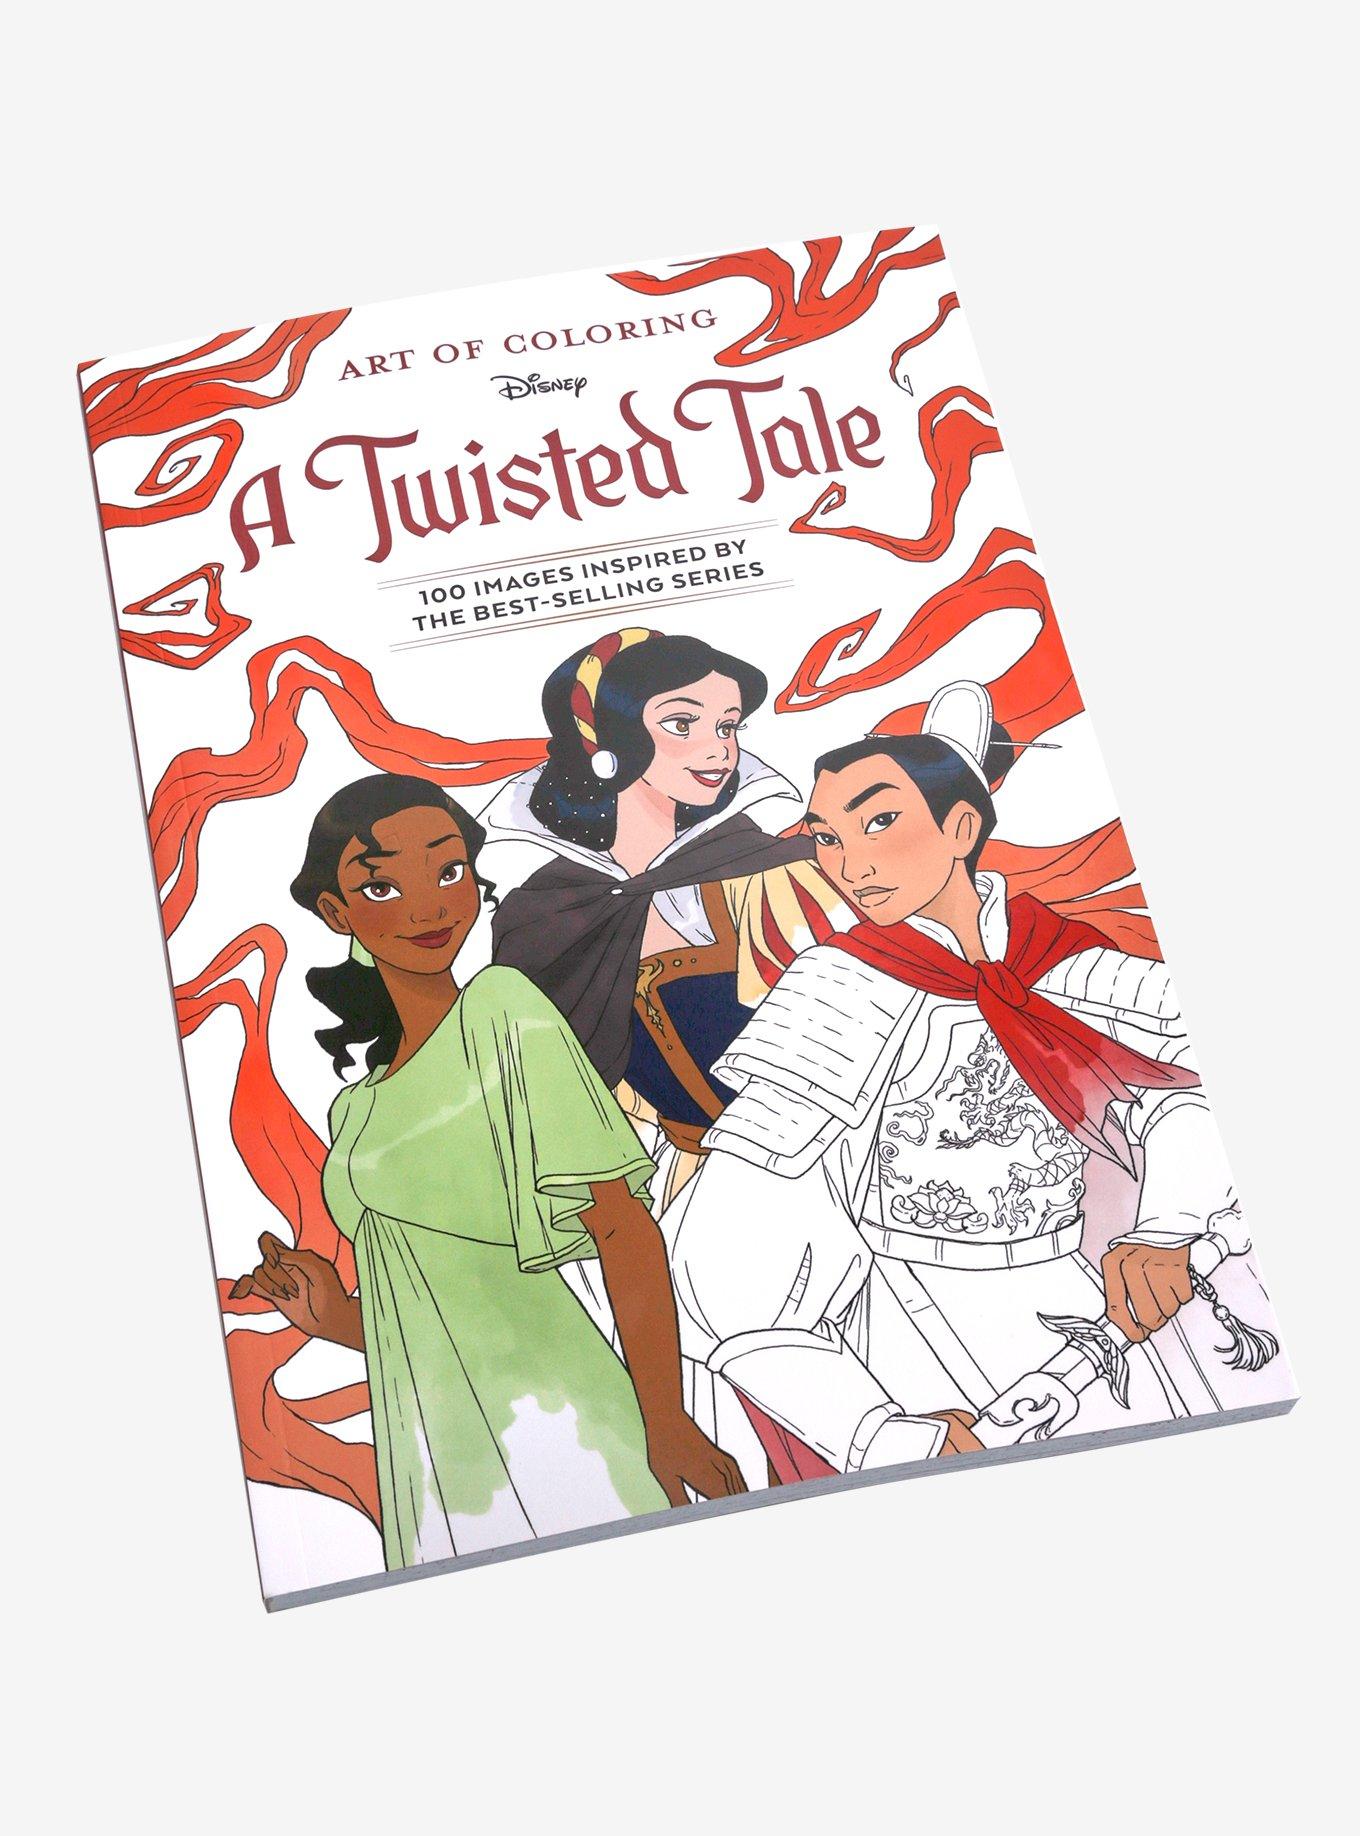 Disney Art Of Coloring: A Twisted Tale Coloring Book, , hi-res